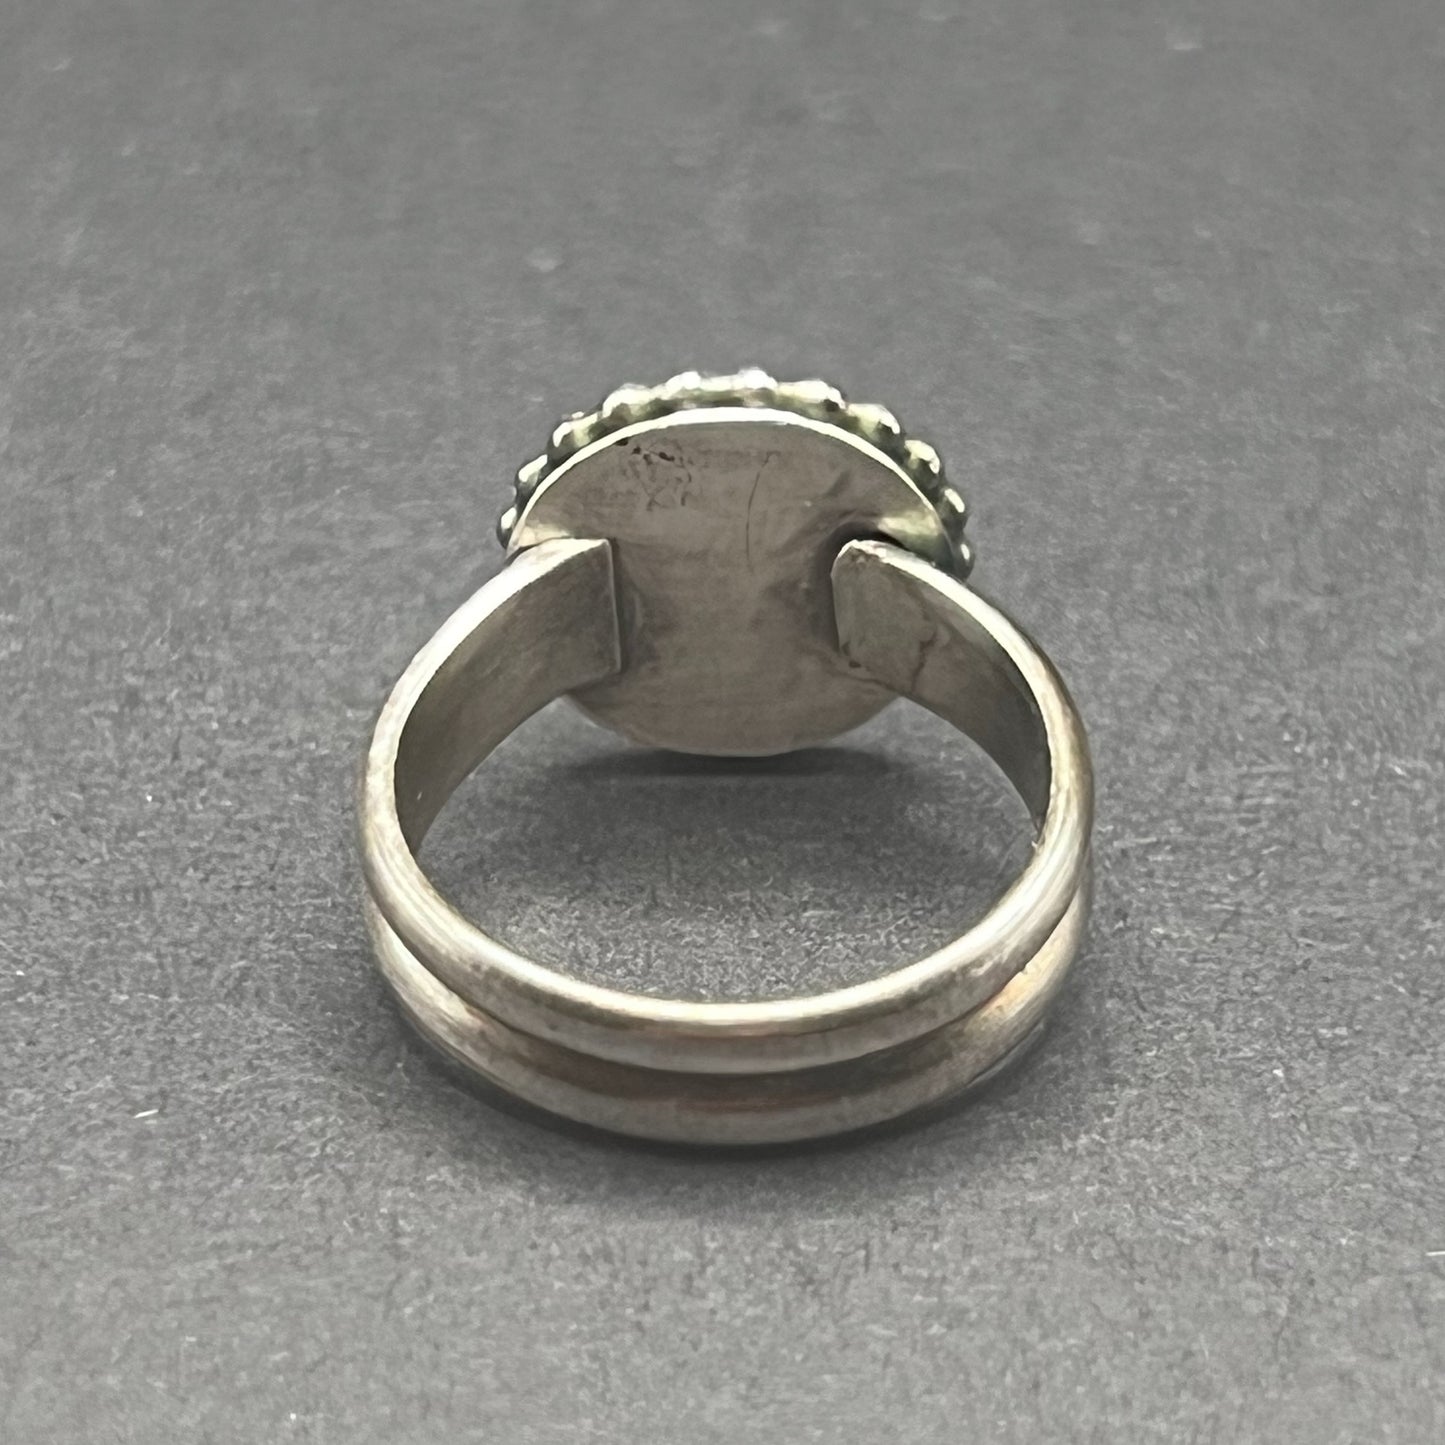 Image shows back side of ring, with split shank band.